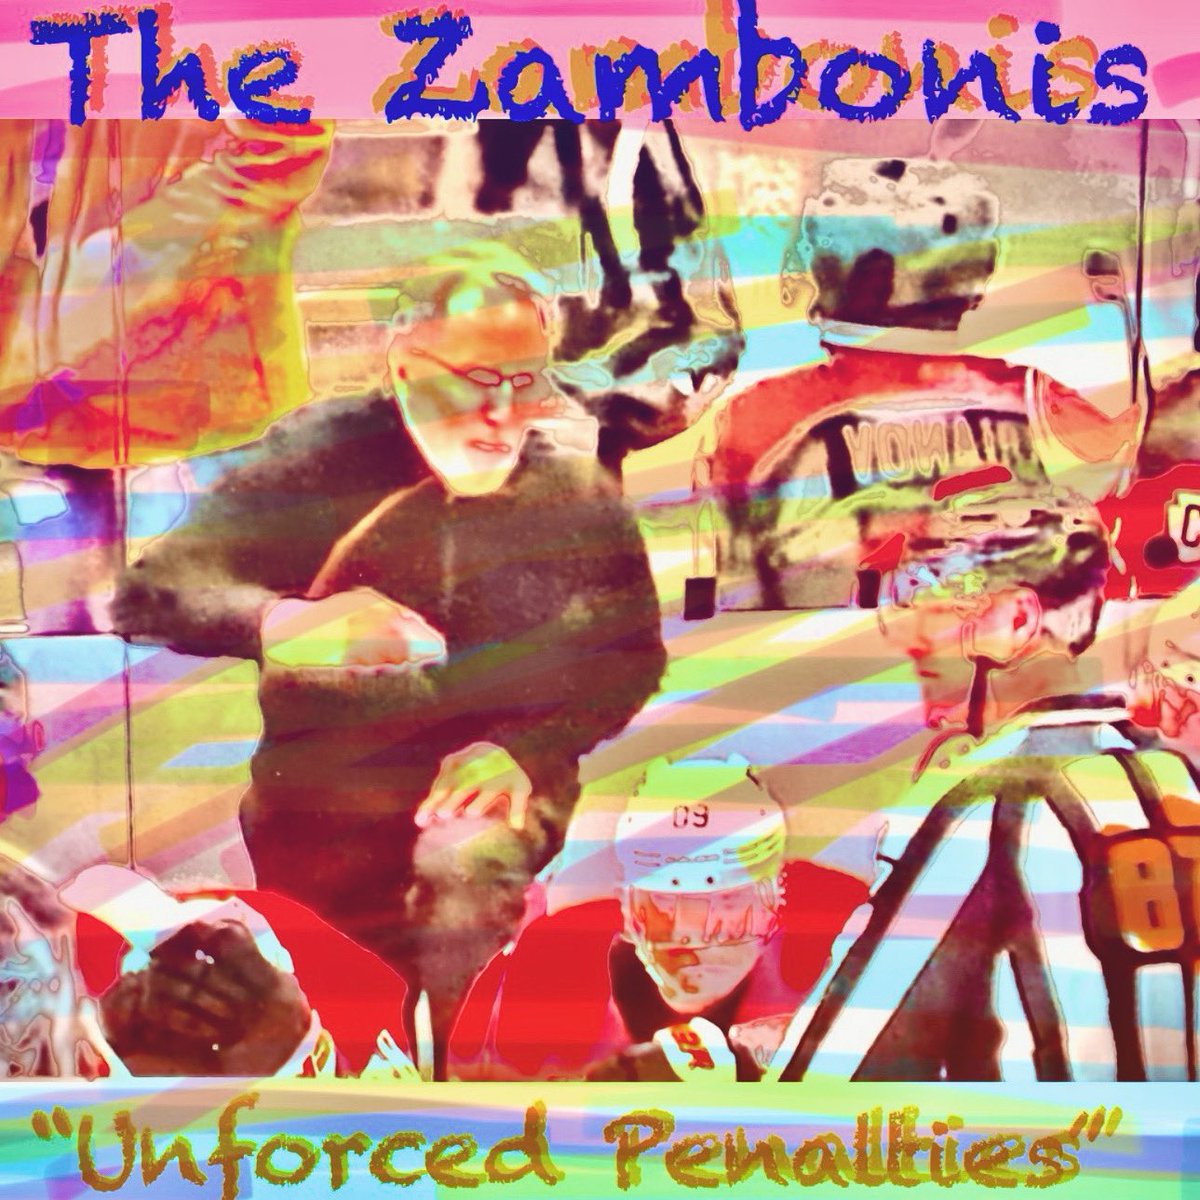 New song and video next week! “Unforced  Penalties”. They can drive ya crazy crazy crazy. This one is definitely a tip of the old helmet to a group that put out one of the best records ever. #Thesonics #thezambonis #newmusic #hockeyrocks
@TheHockeyNews @wyshynski @GrantLawrence